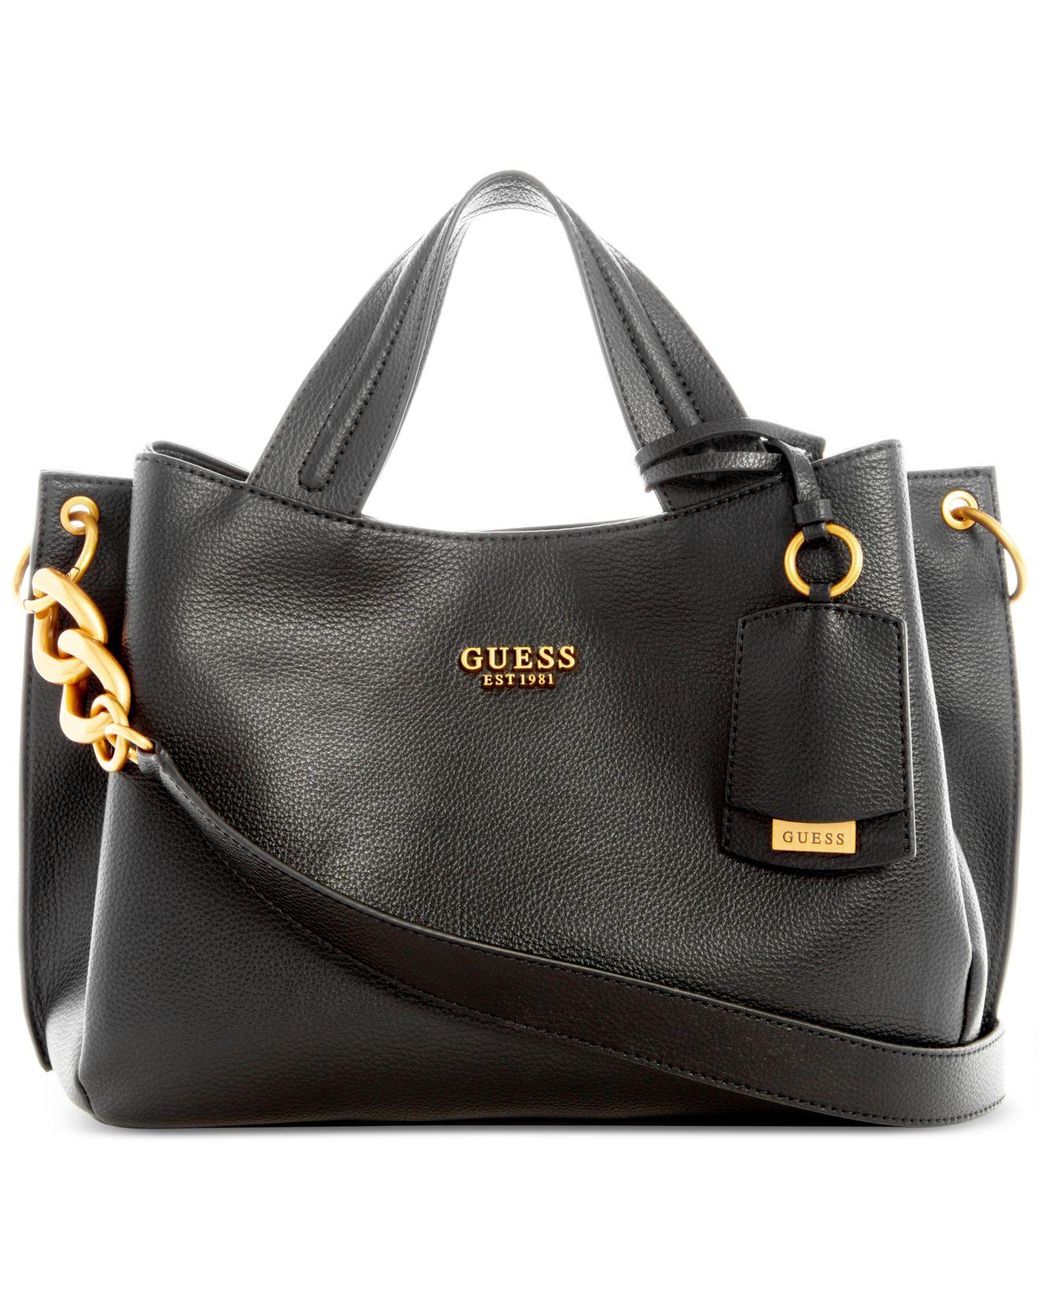 Guess Zed Girlfriend Triple Compartment Large Carryall Satchel in Black ...